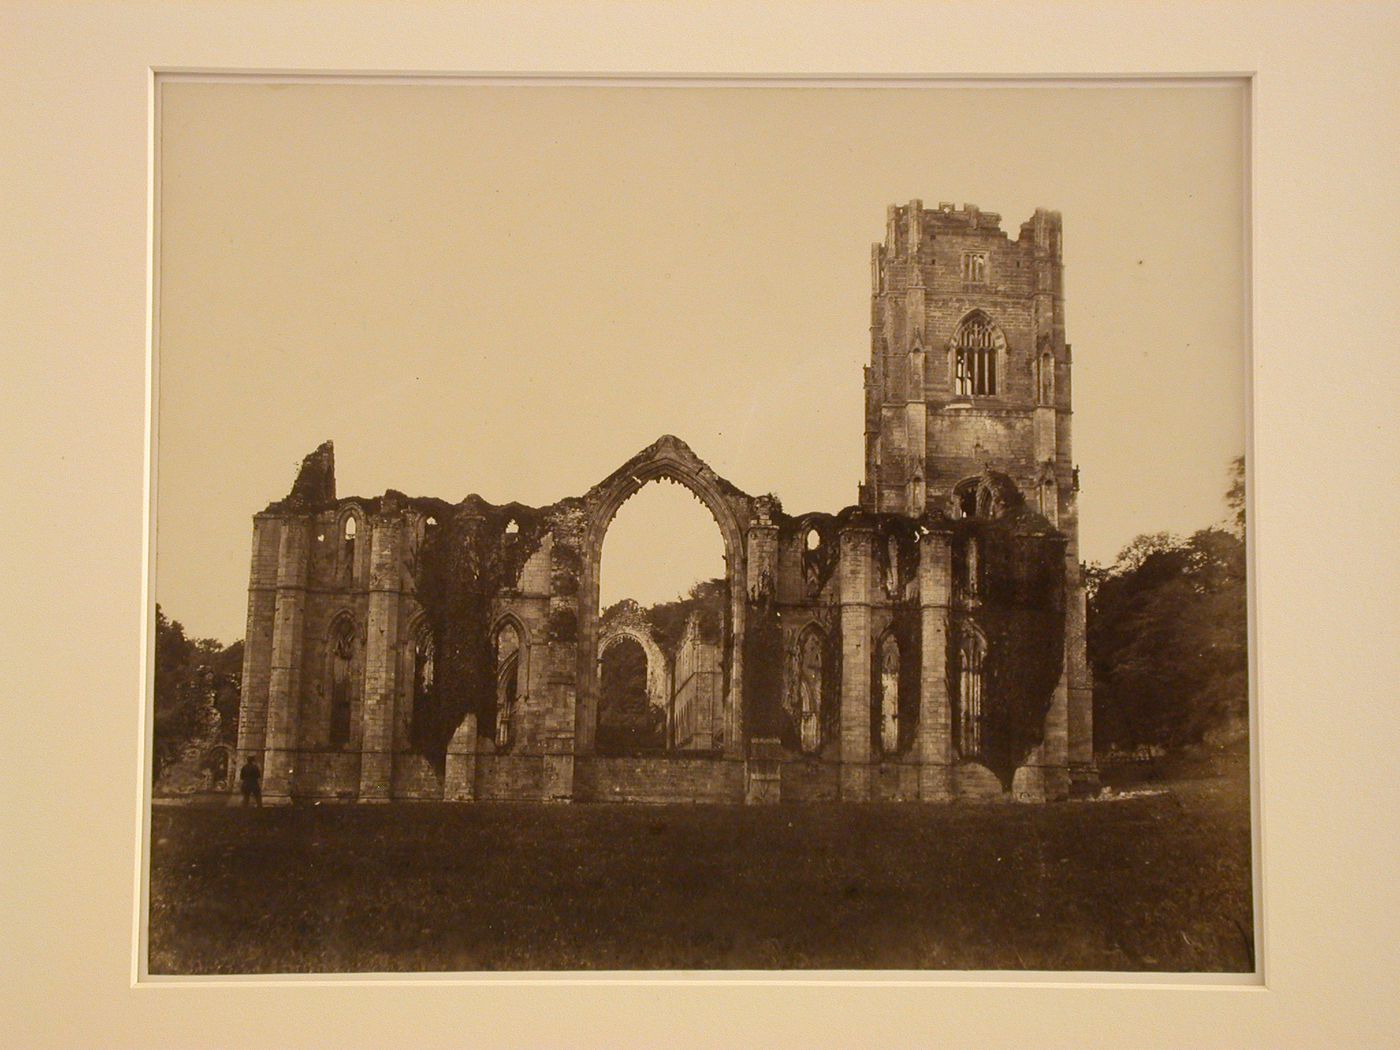 Fountains Abbey, view of façade, tower, and part of interior, North Yorkshire, England